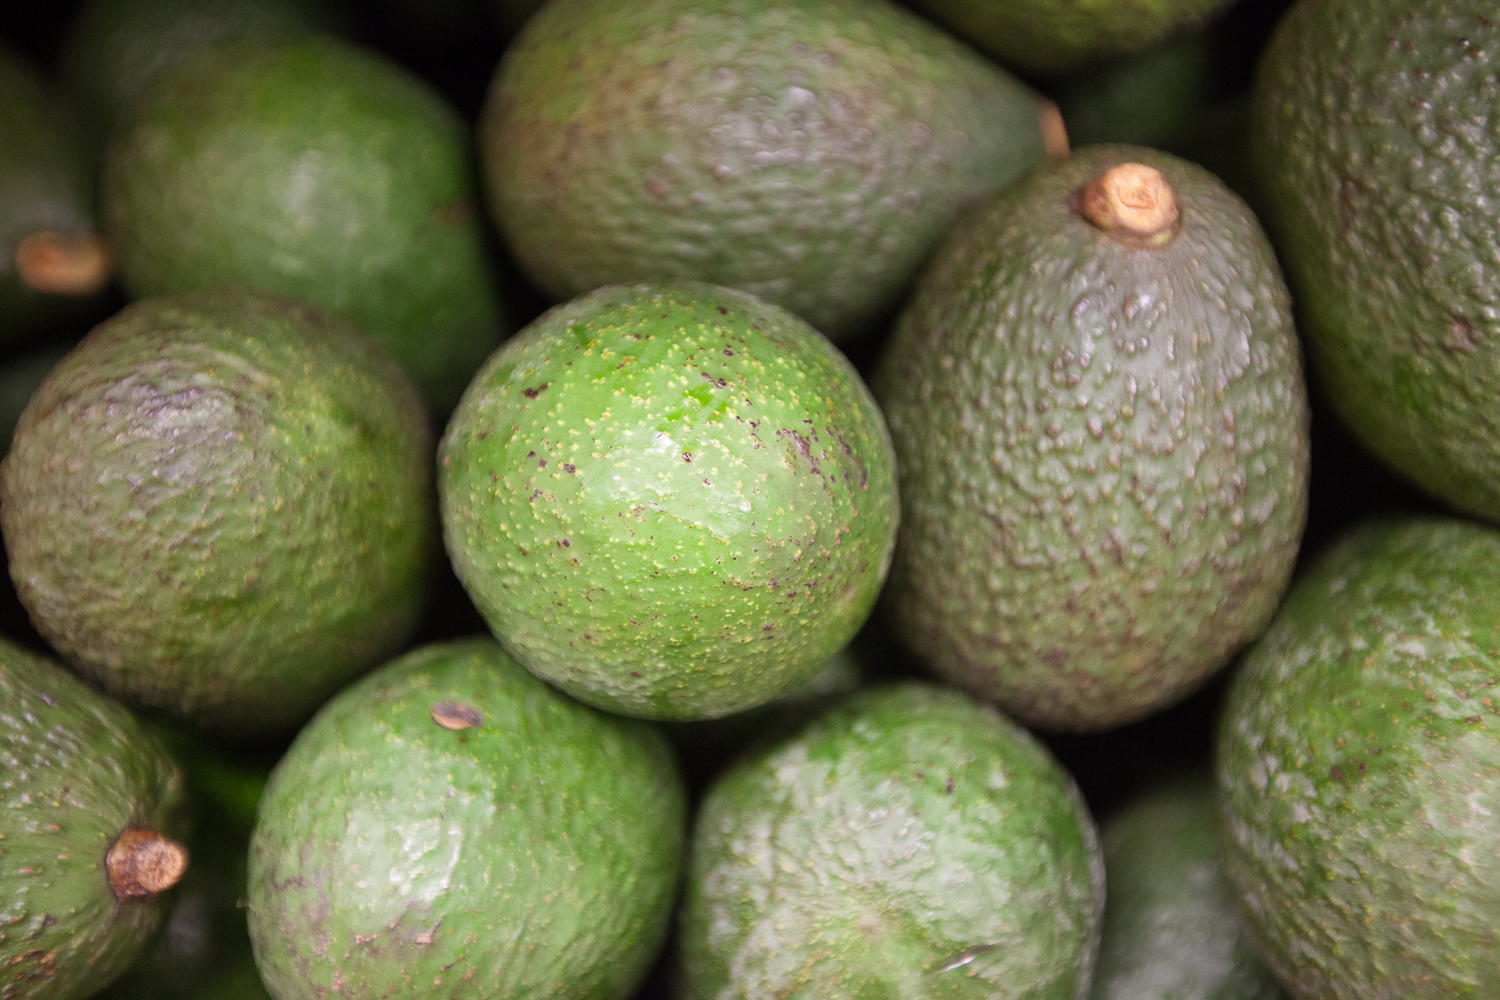 Organic Avacados From Mana Foods Produce Department